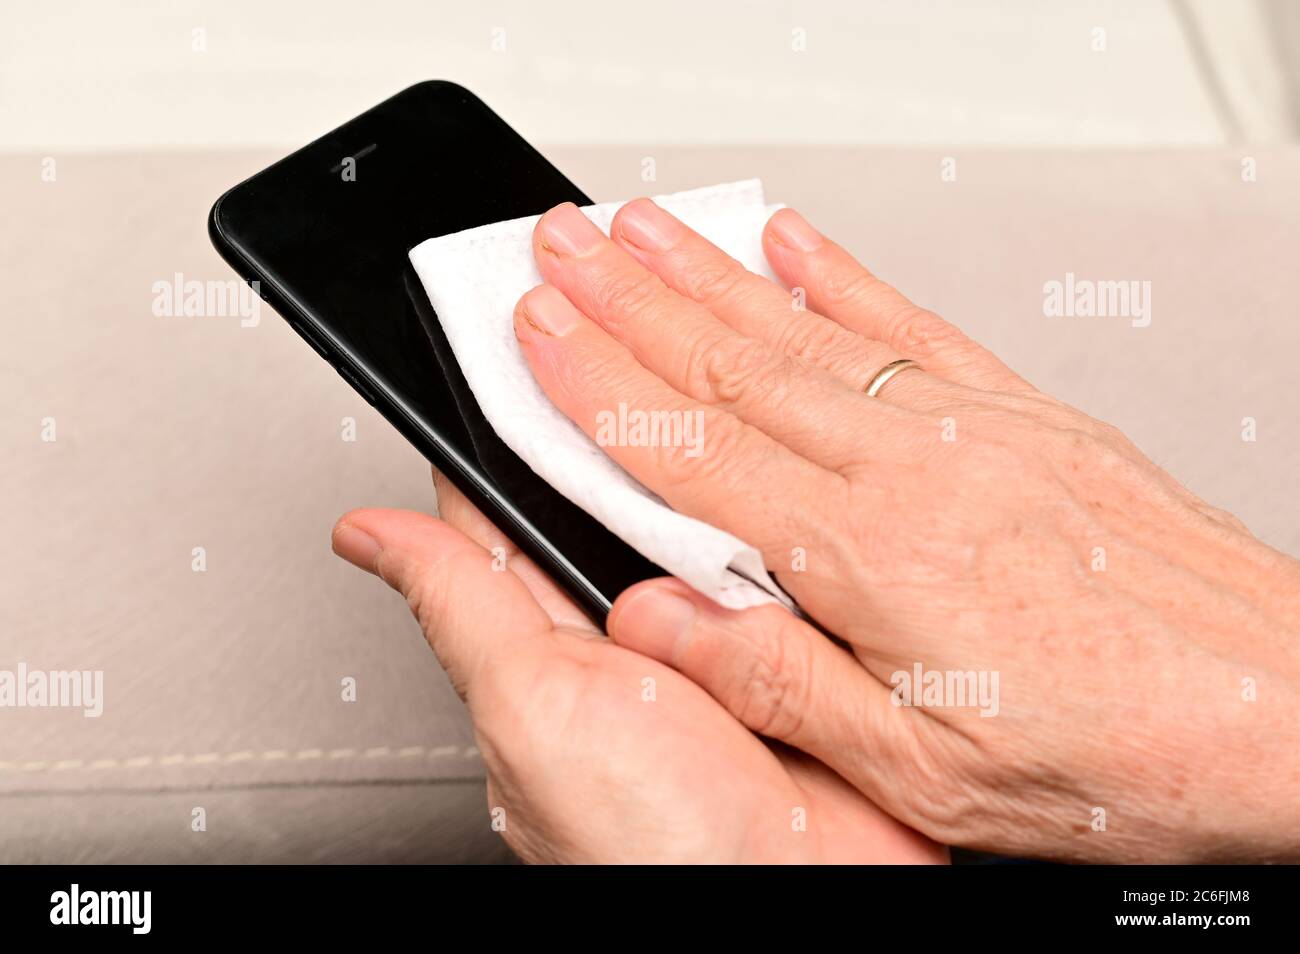 Elder woman is cleaning her smart phone screen to eliminate germs, covid-19 with alcohol. Stock Photo